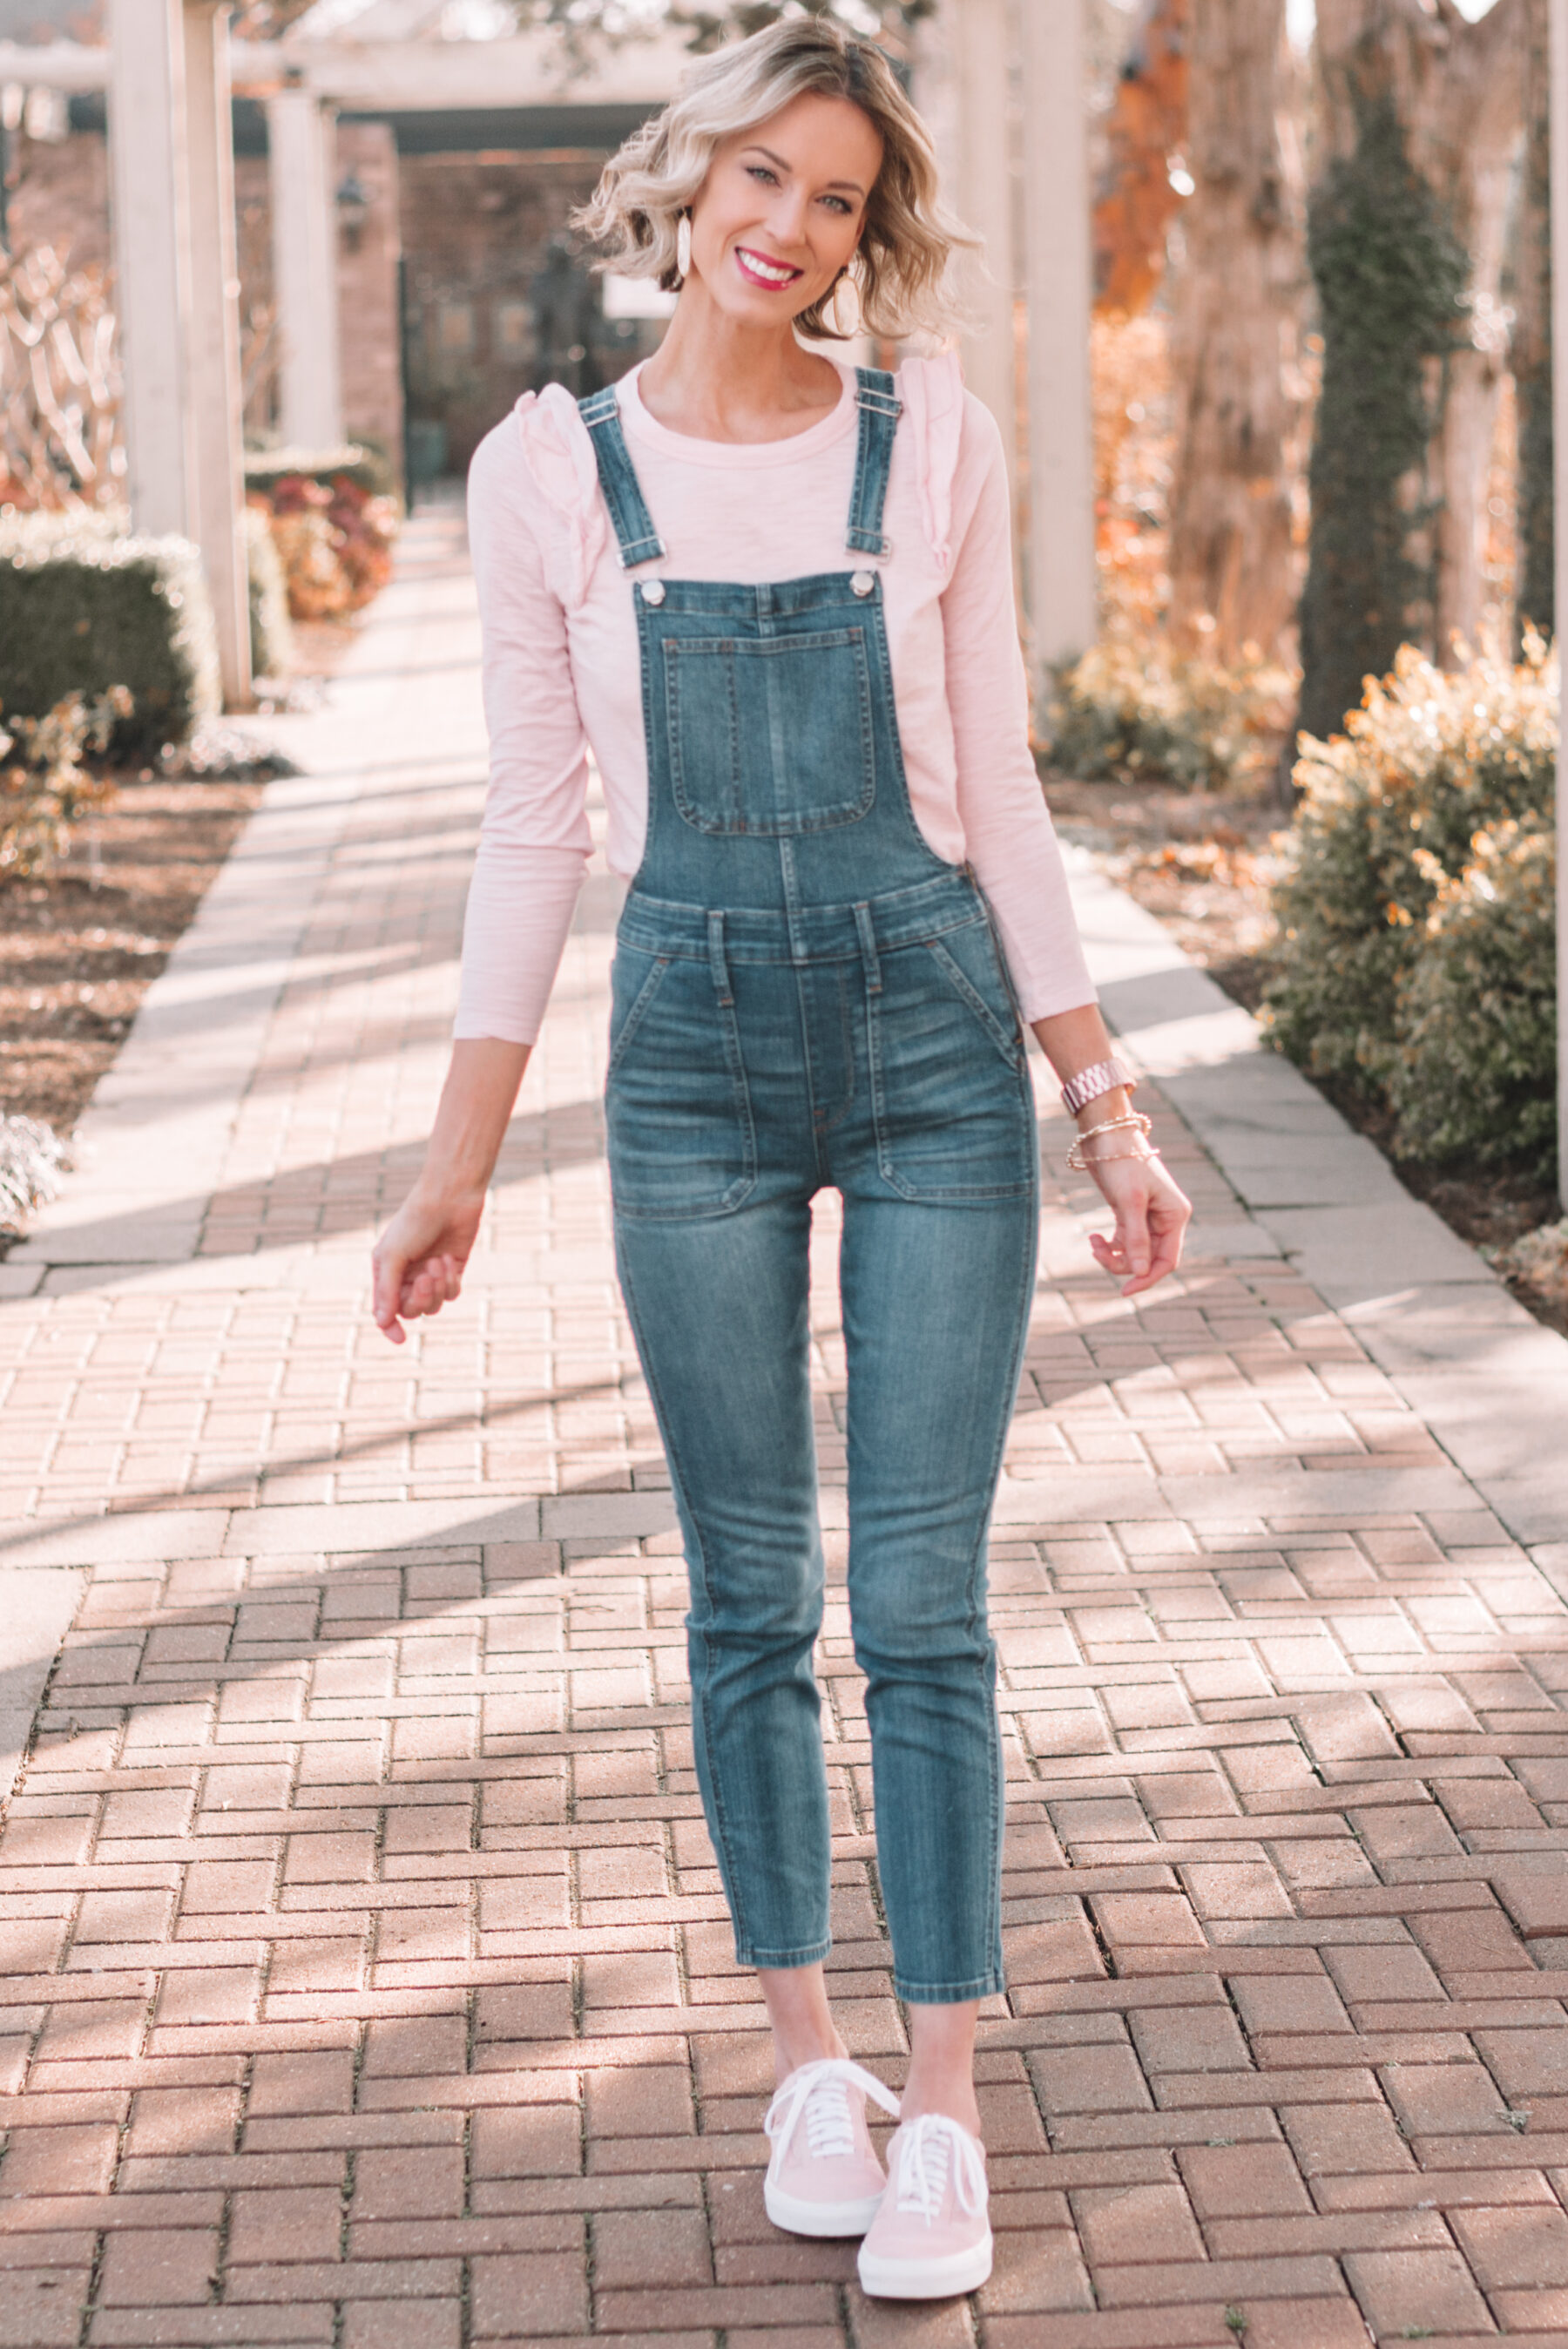 How to Wear Overalls - Styling Tips and Tricks to Avoid Looking Like a ...